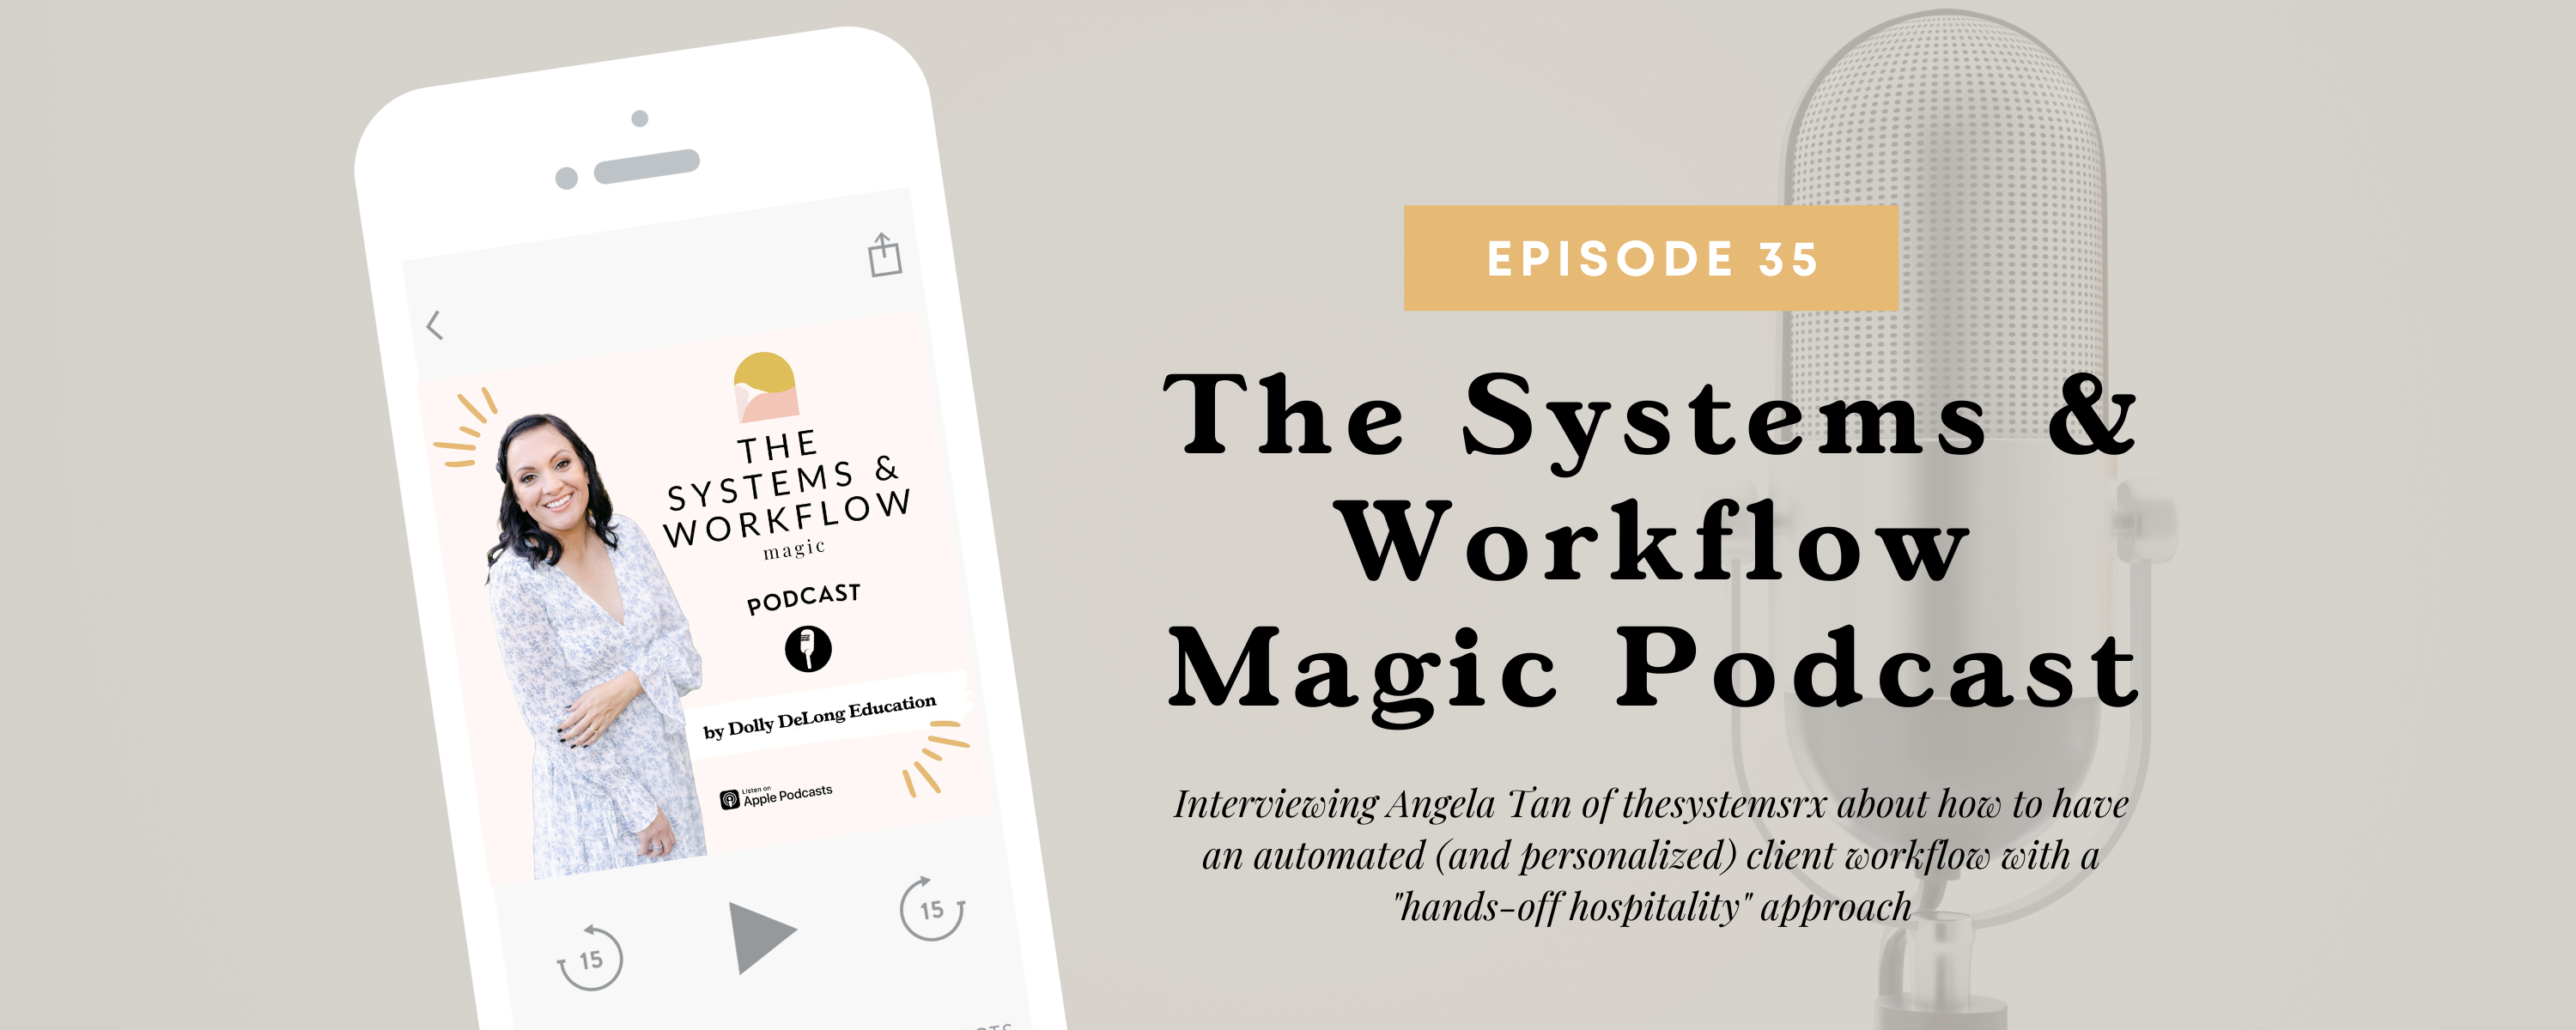 Episode 35 of the Systems and Workflow Magic Podcast